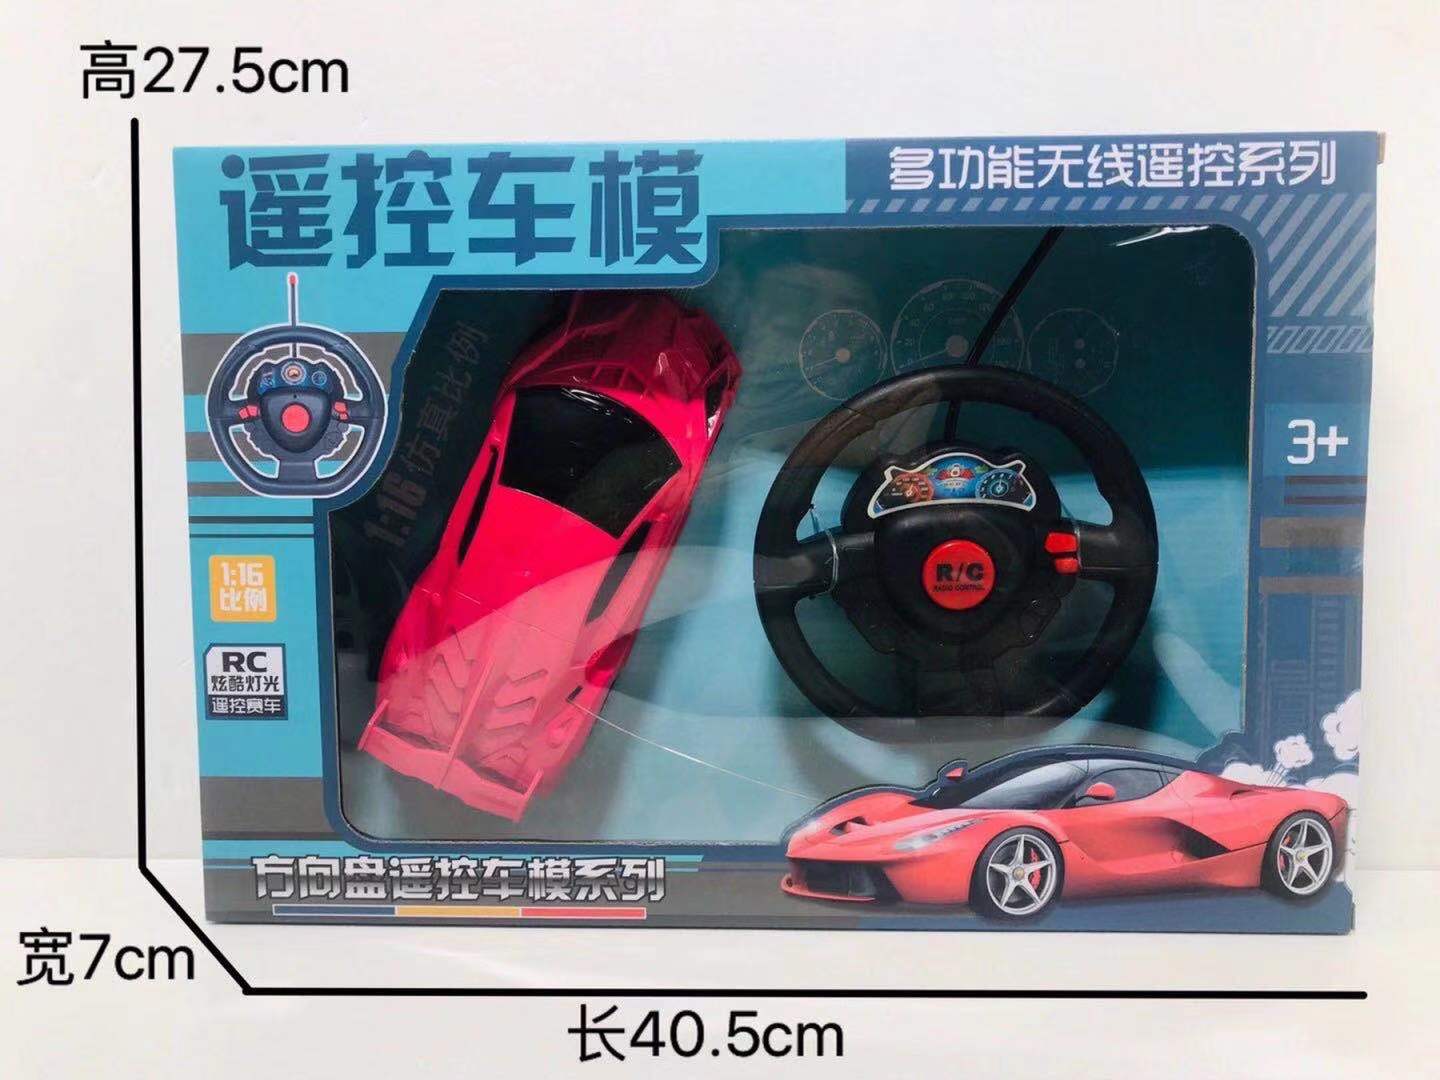 2-way wireless remote control car children’s toys fall resistant sports car model manufacturer direct selling boy’s stal